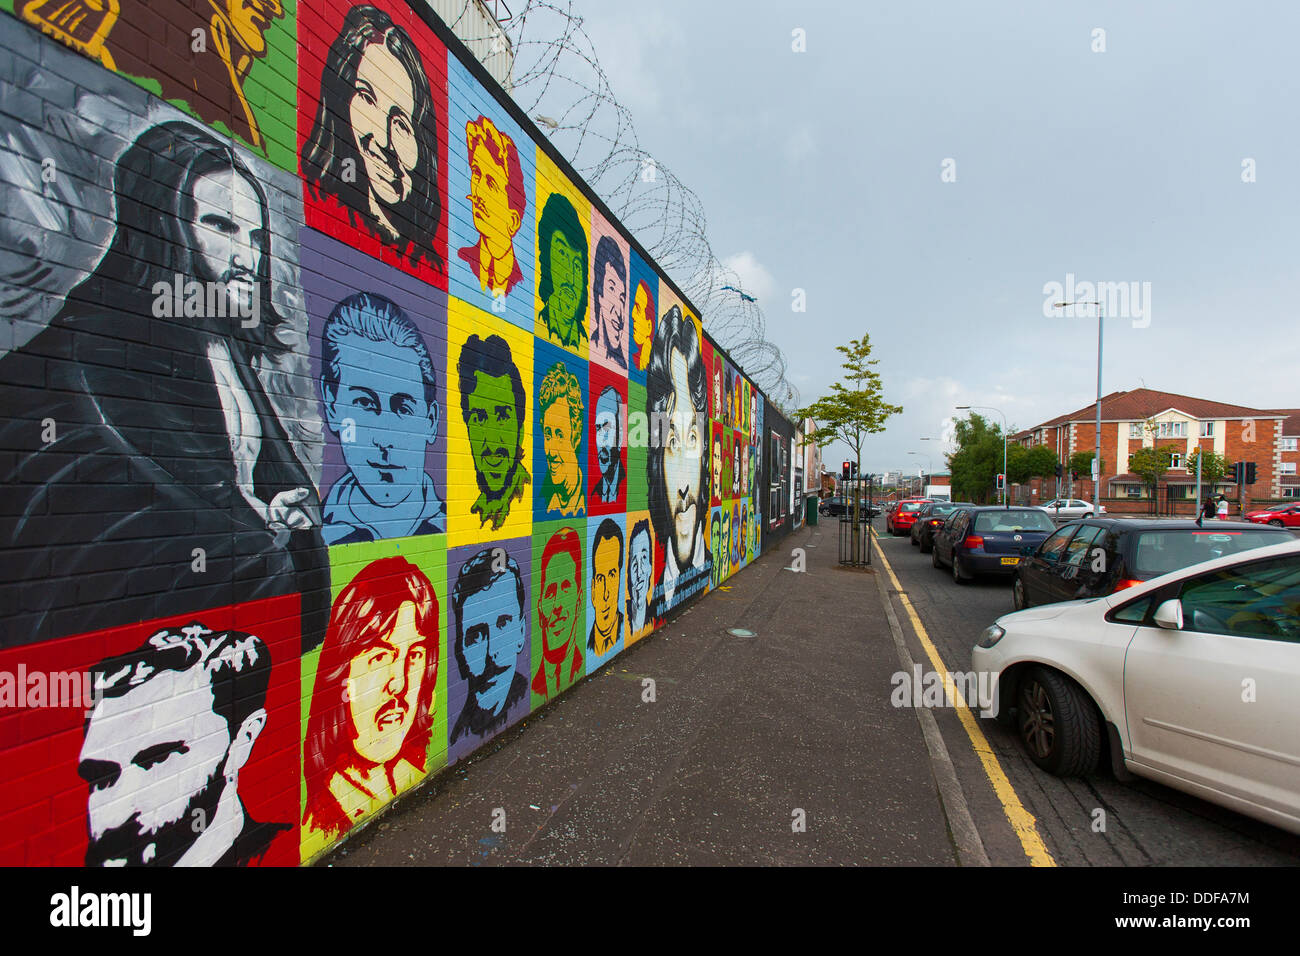 Political murals colorfully painted on a wall in Belfast, Northern Ireland Stock Photo